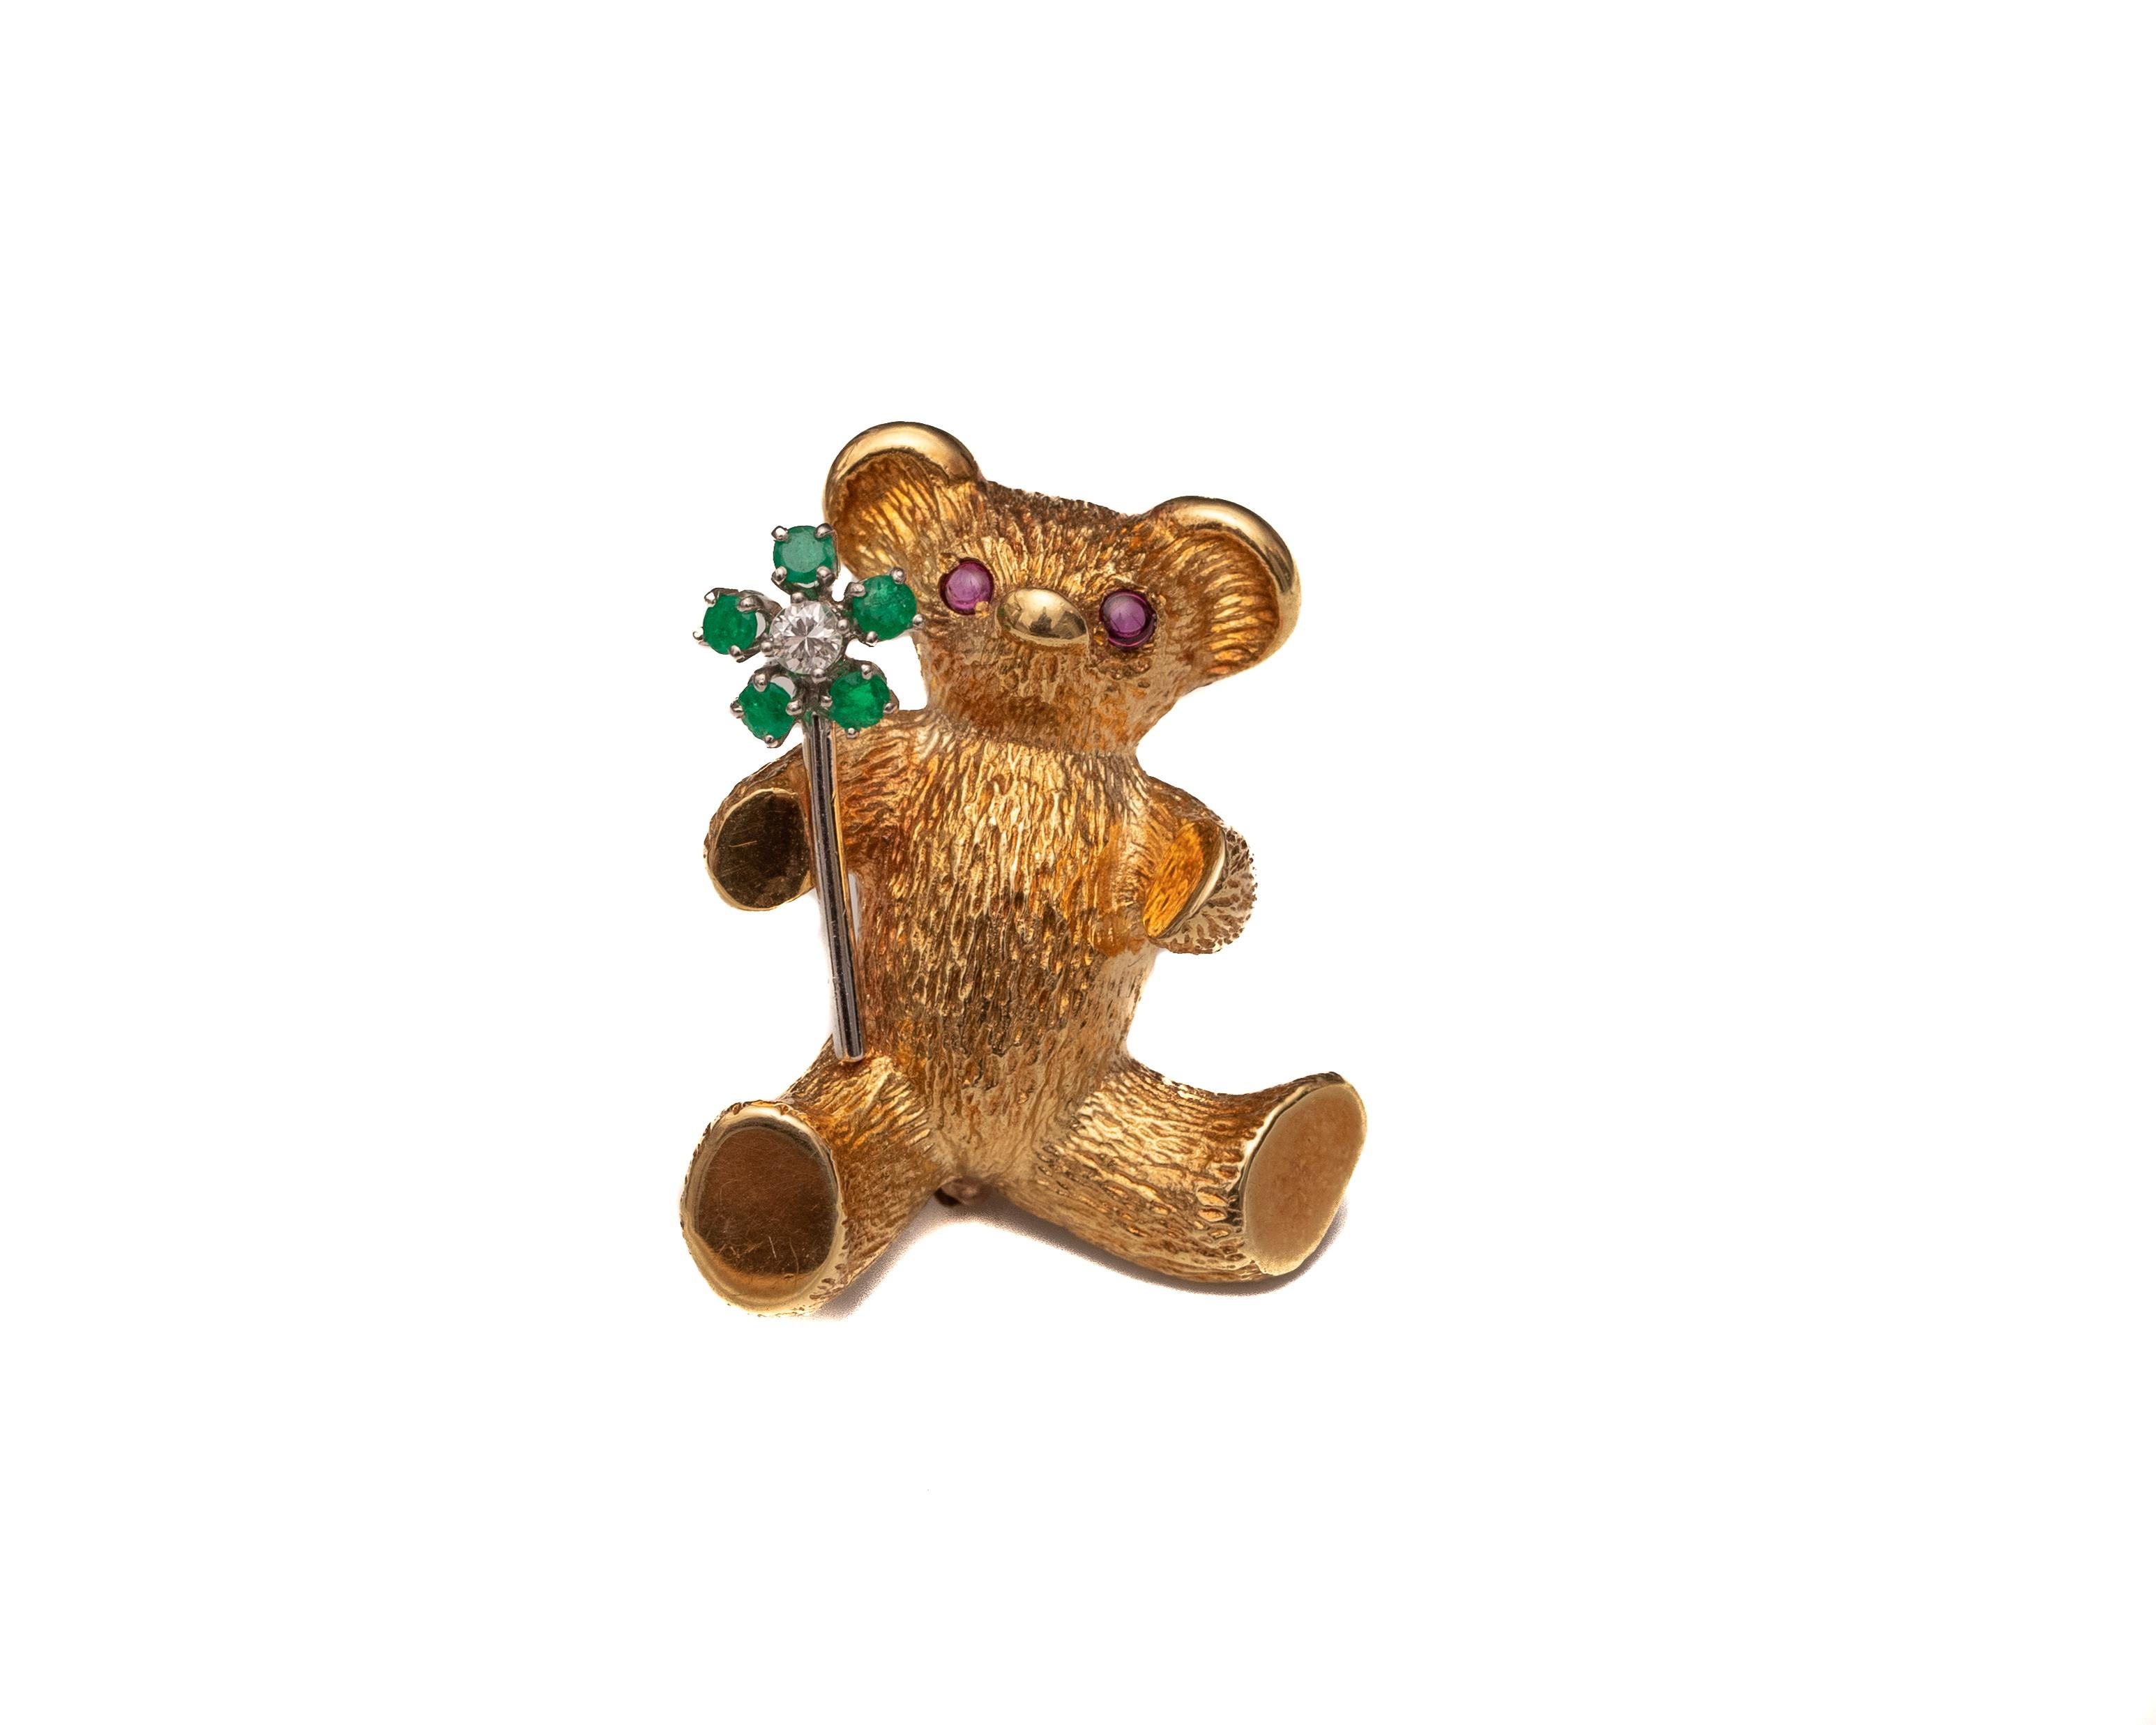 Brooch Pin Details:
Metal type: 18 Karat Yellow Gold with White Gold Accent
Weight: 15 Grams
Measures: 1.5 Inches length x 1 Inch width

The teddy bear is made up of  high contrast 18 karat yellow gold that is textured on the entire body. Eyes are